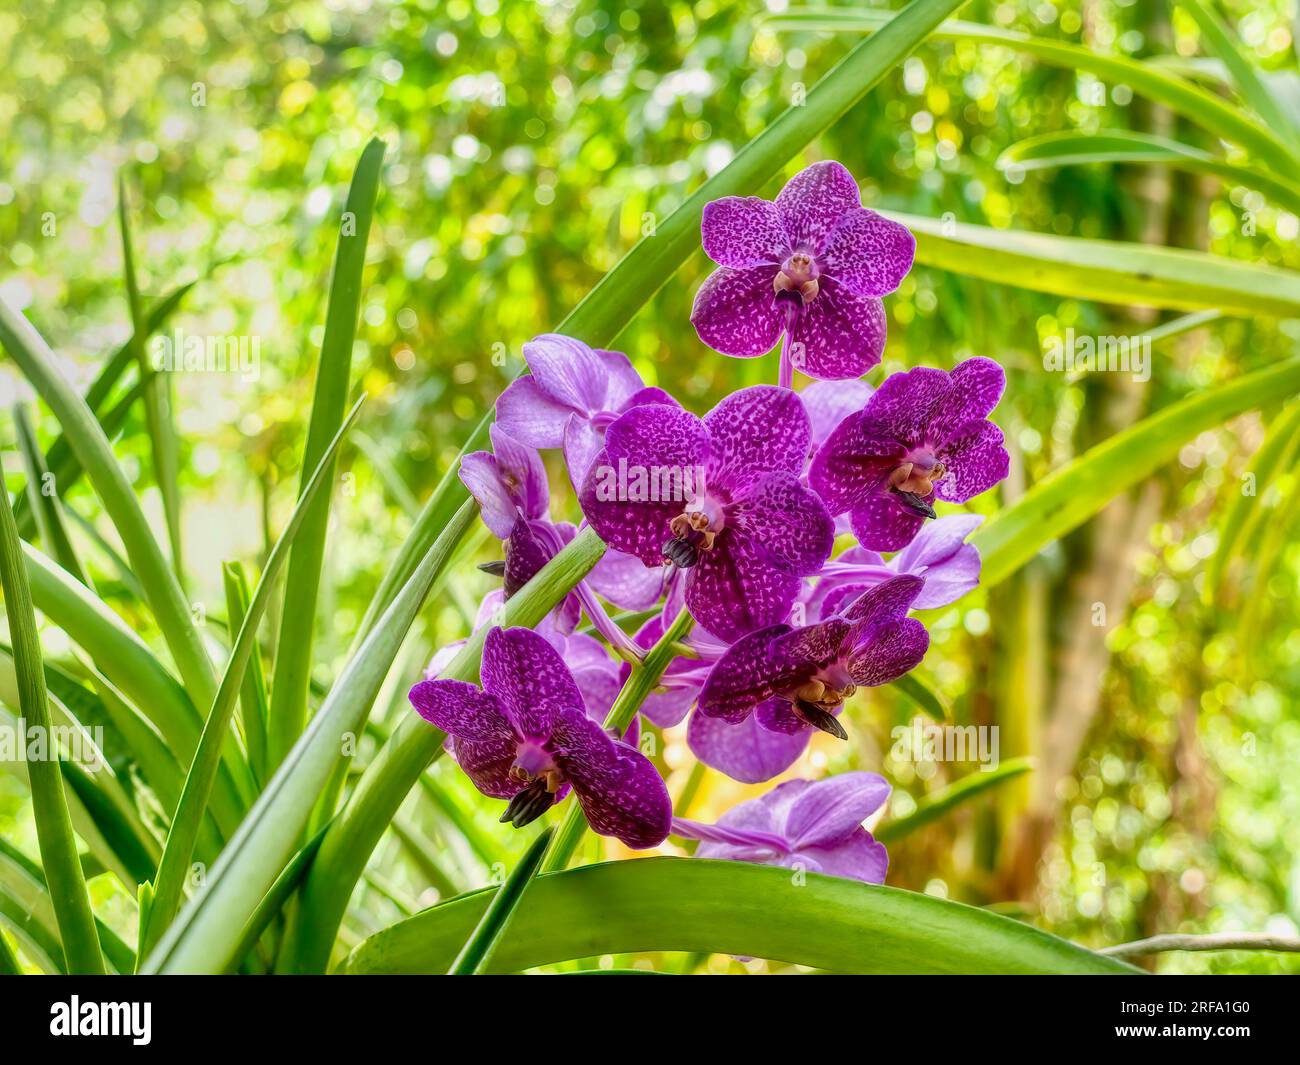 A beautiful purple speckled Vanda orchid blooming in an outdoor garden in the Philippines. Stock Photo